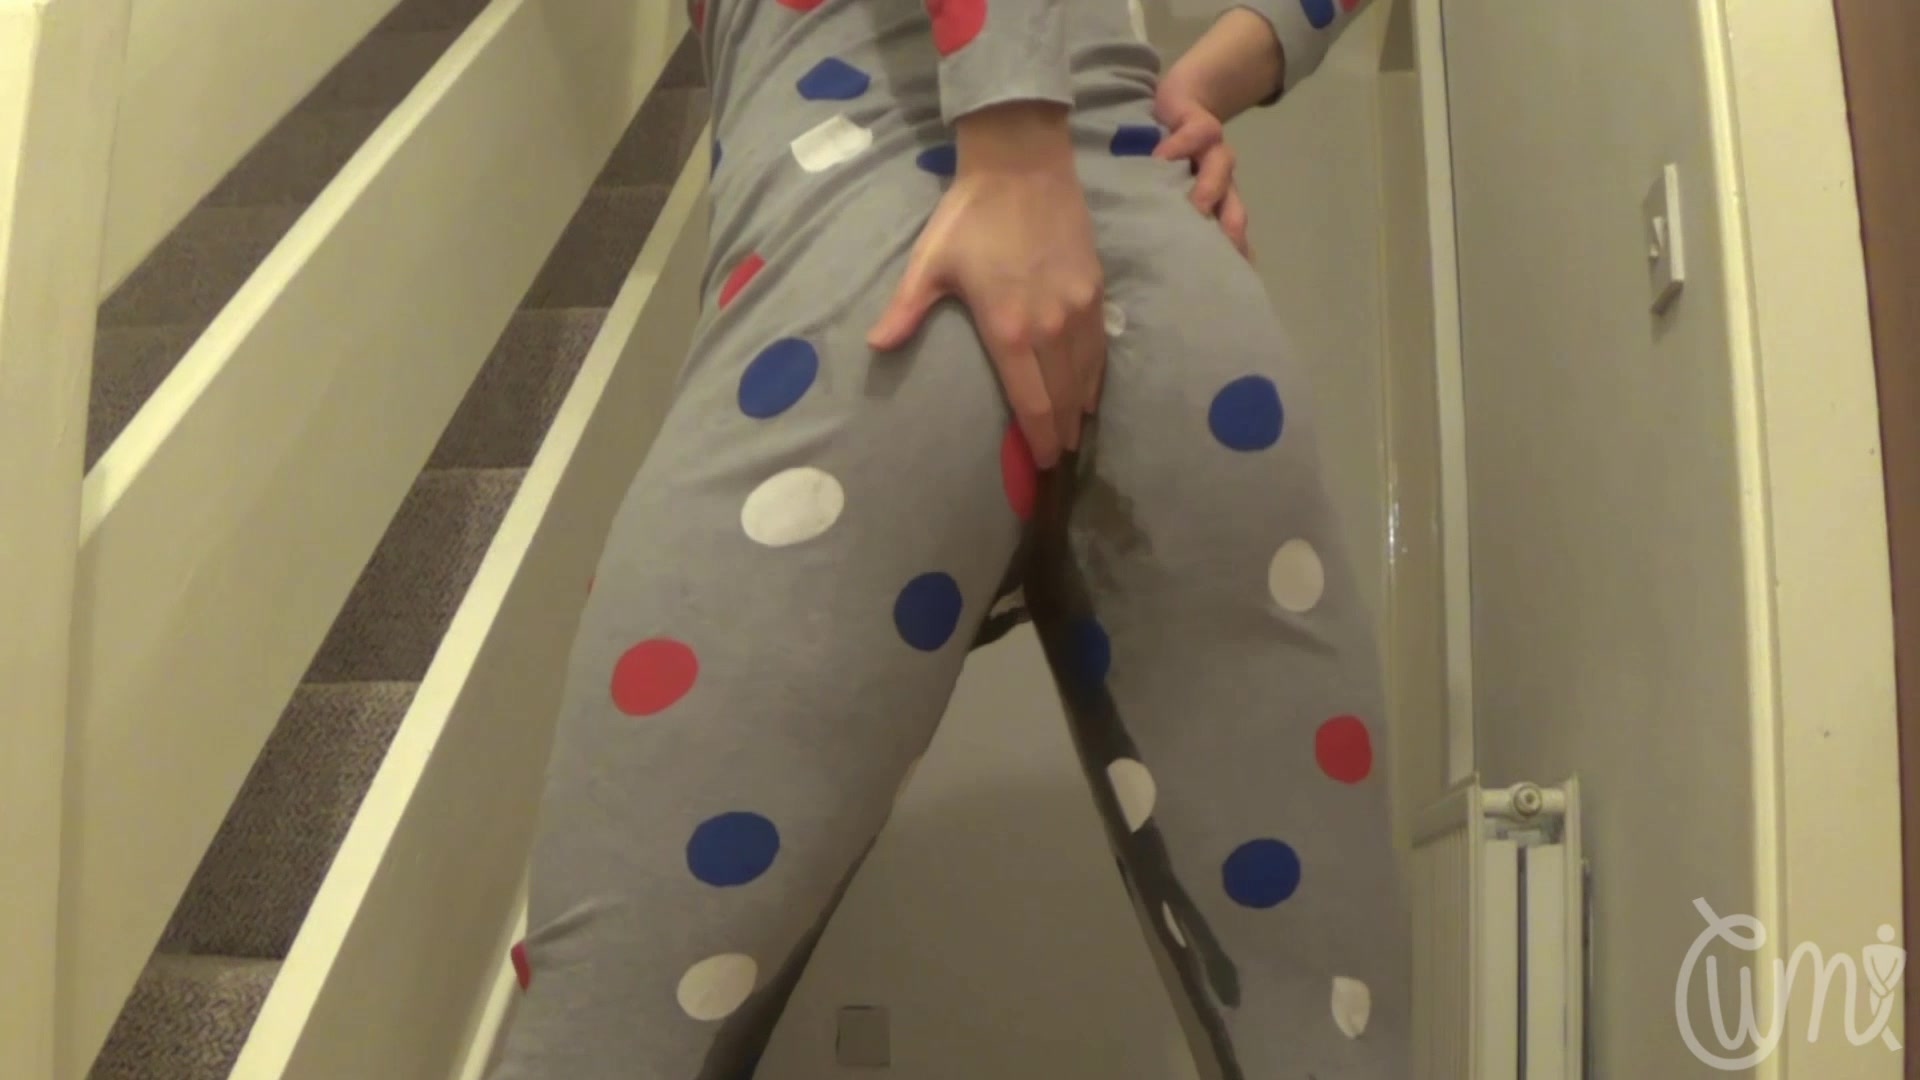 CUTE WET MESS: Shitting, Smearing & Stroking My Hard Cock In My Onesie